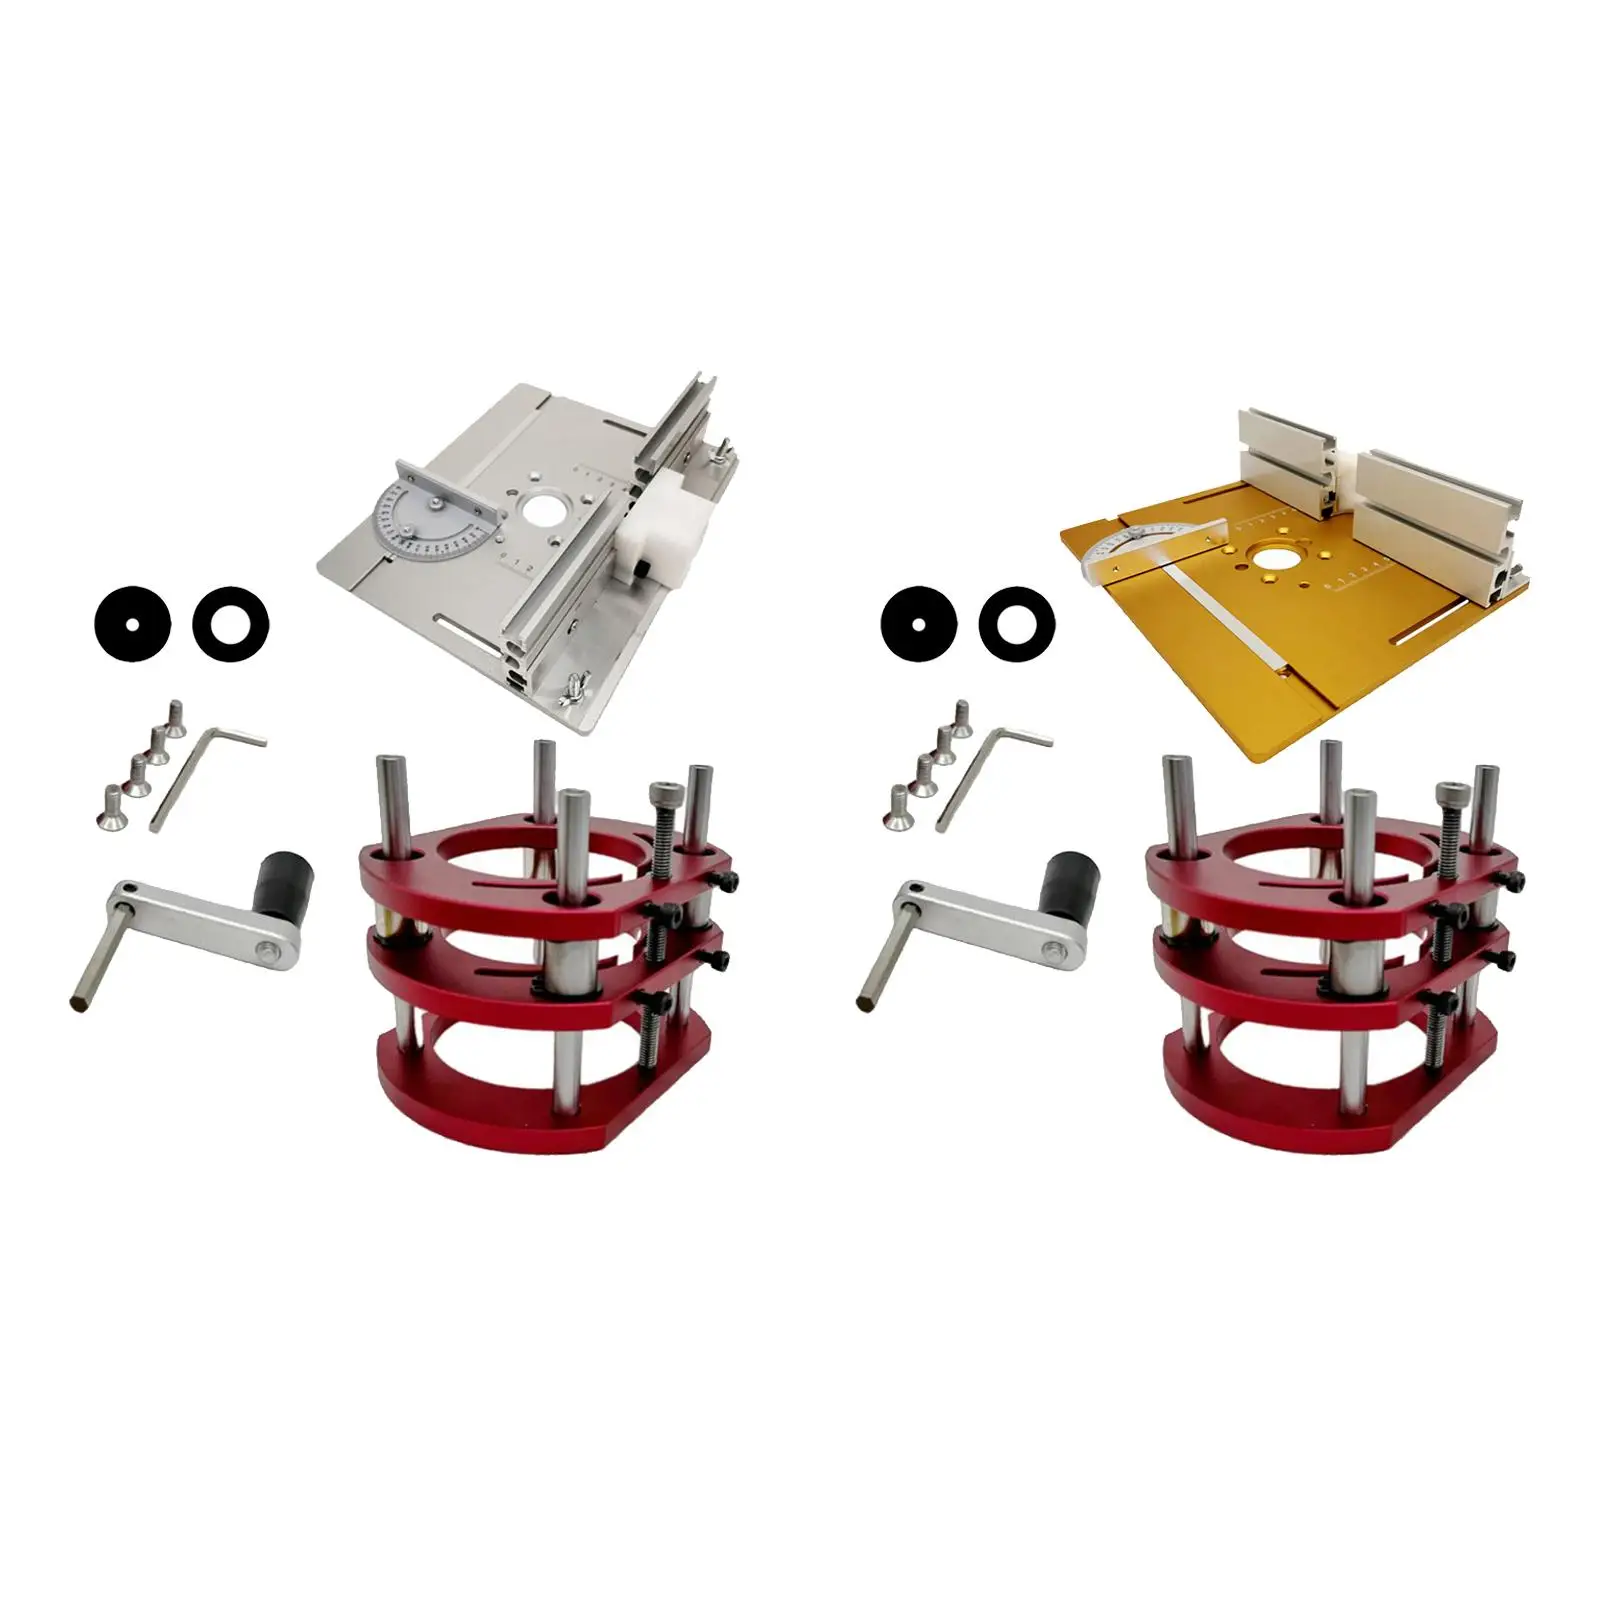 

Multifunctional Router Lift Table Engraving Trimmer Lifting Platform Stand for 64-66mm Diameter Motors Trimming Milling Novices